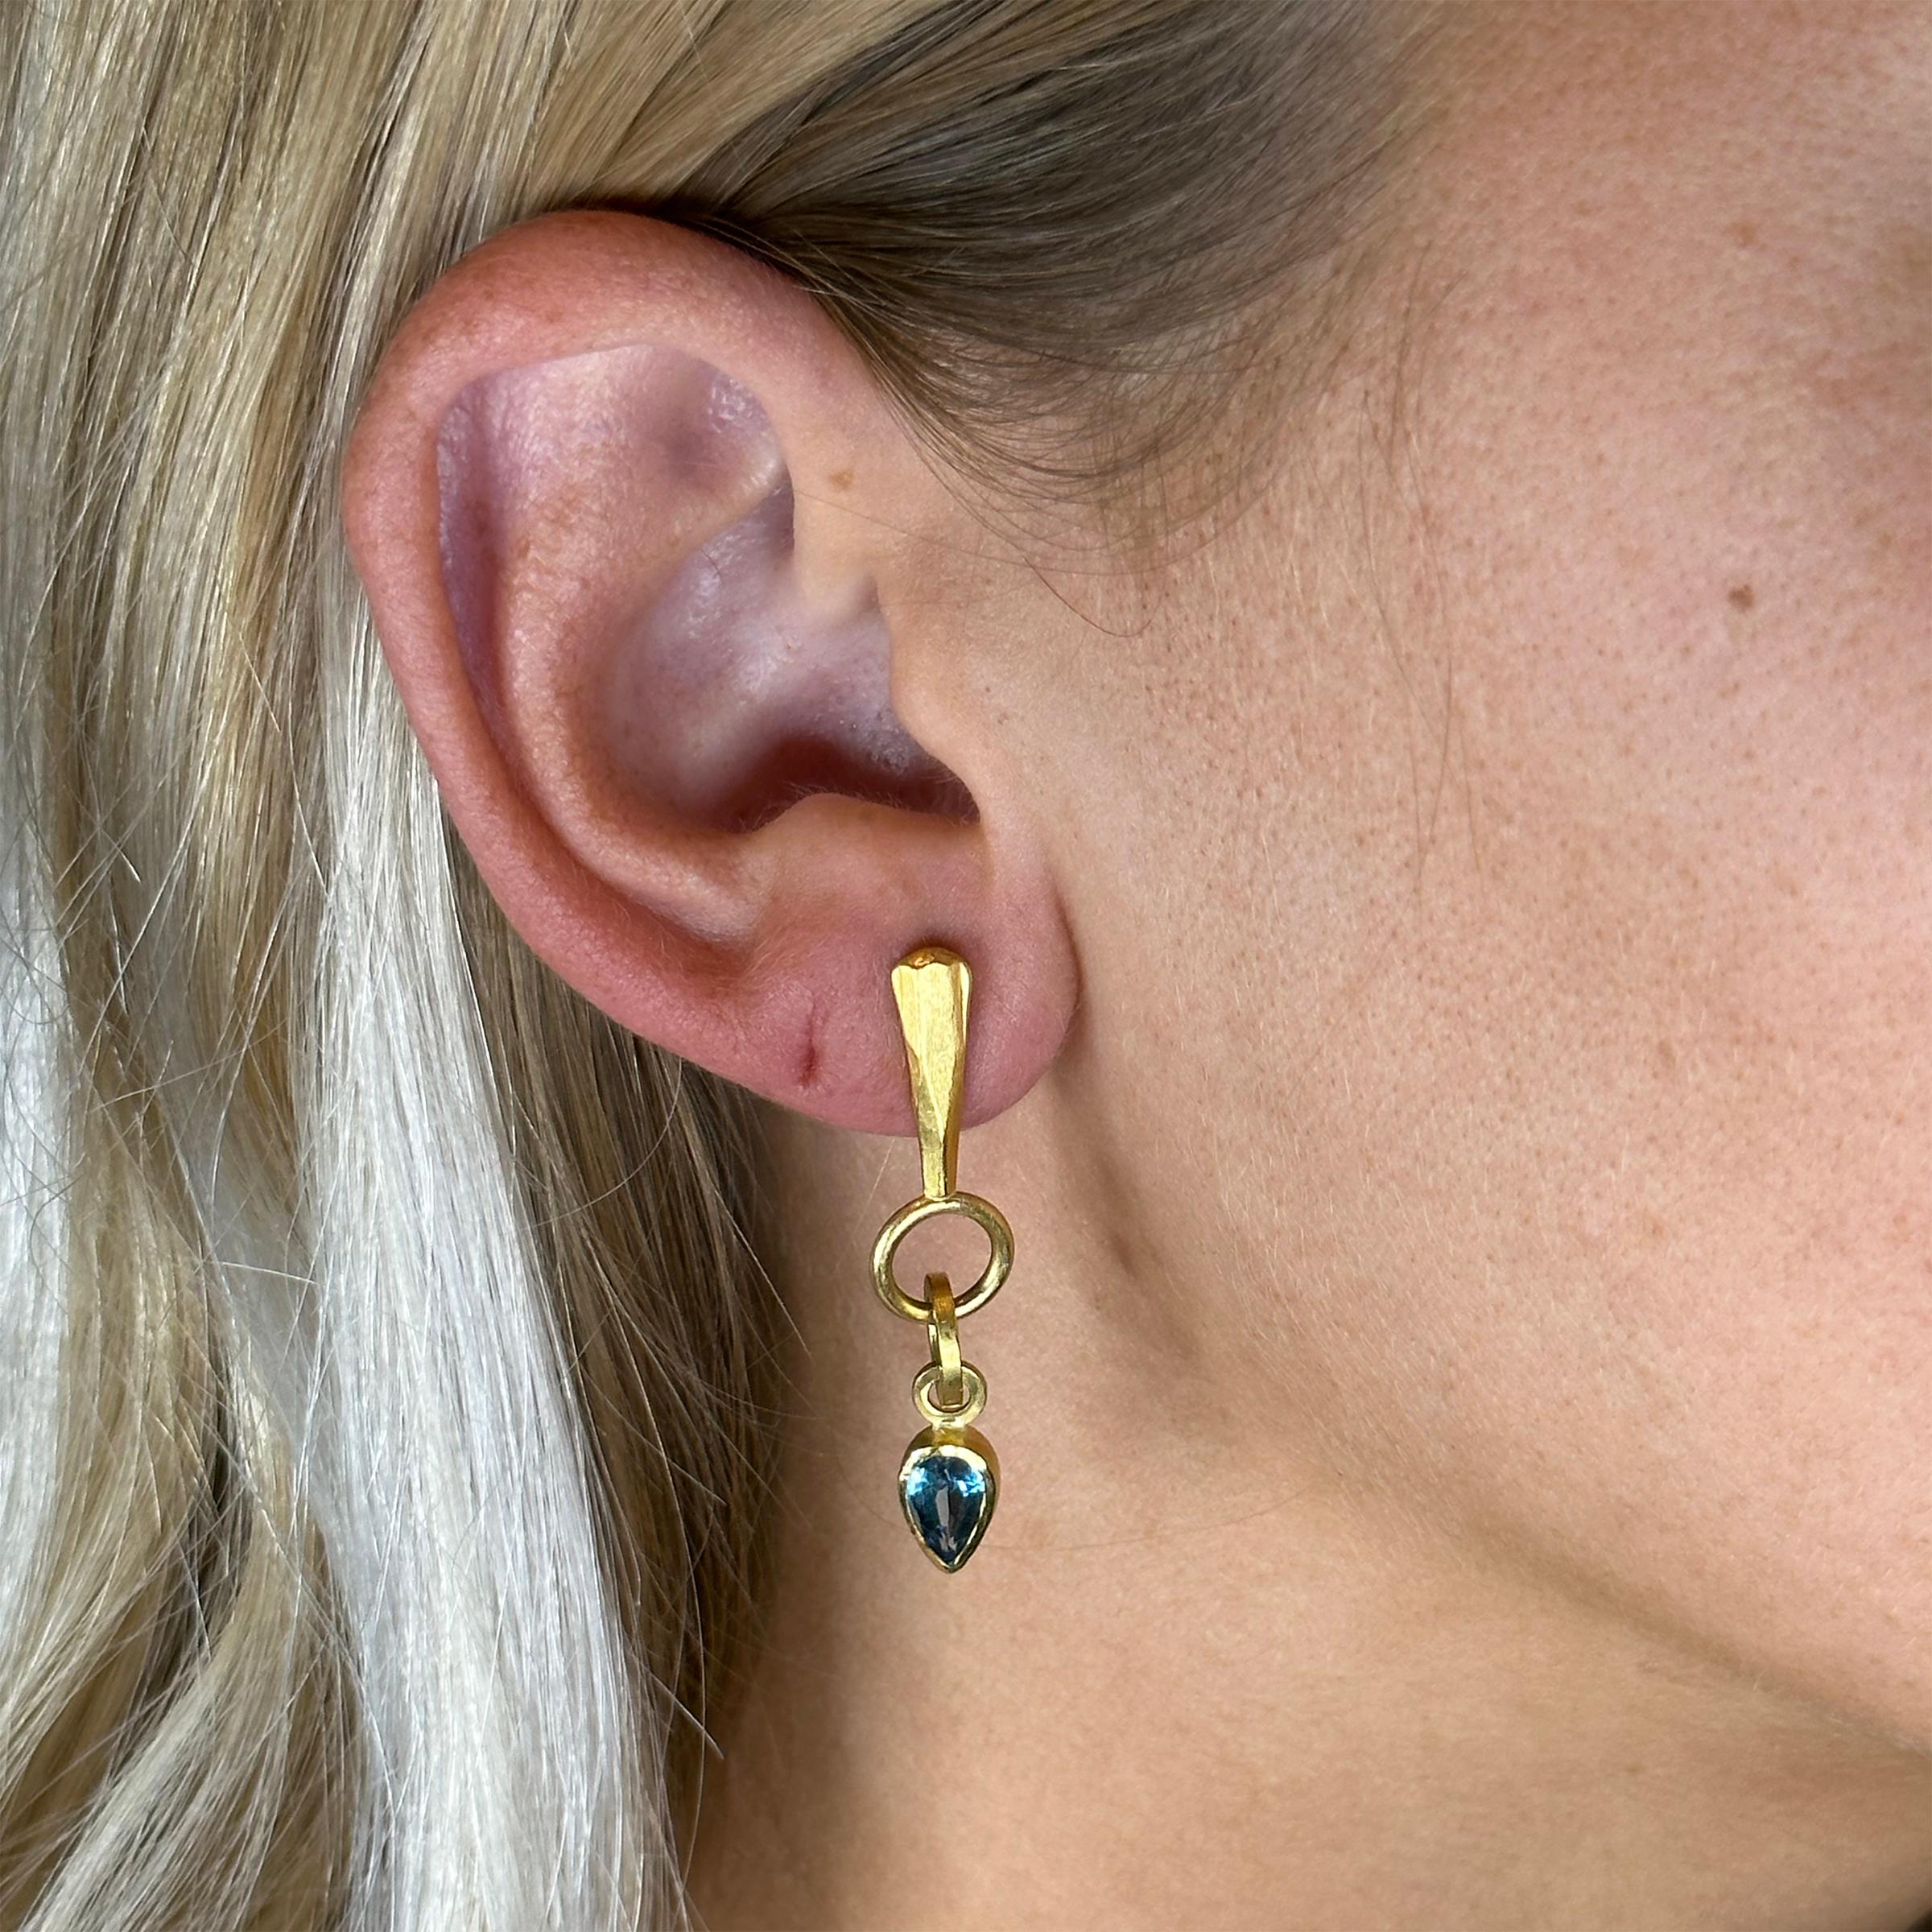 PHILIPPE SPENCER 7.45 Ct. Blue Topaz in 22K & 20K Gold Dangling Earrings In New Condition For Sale In Key West, FL